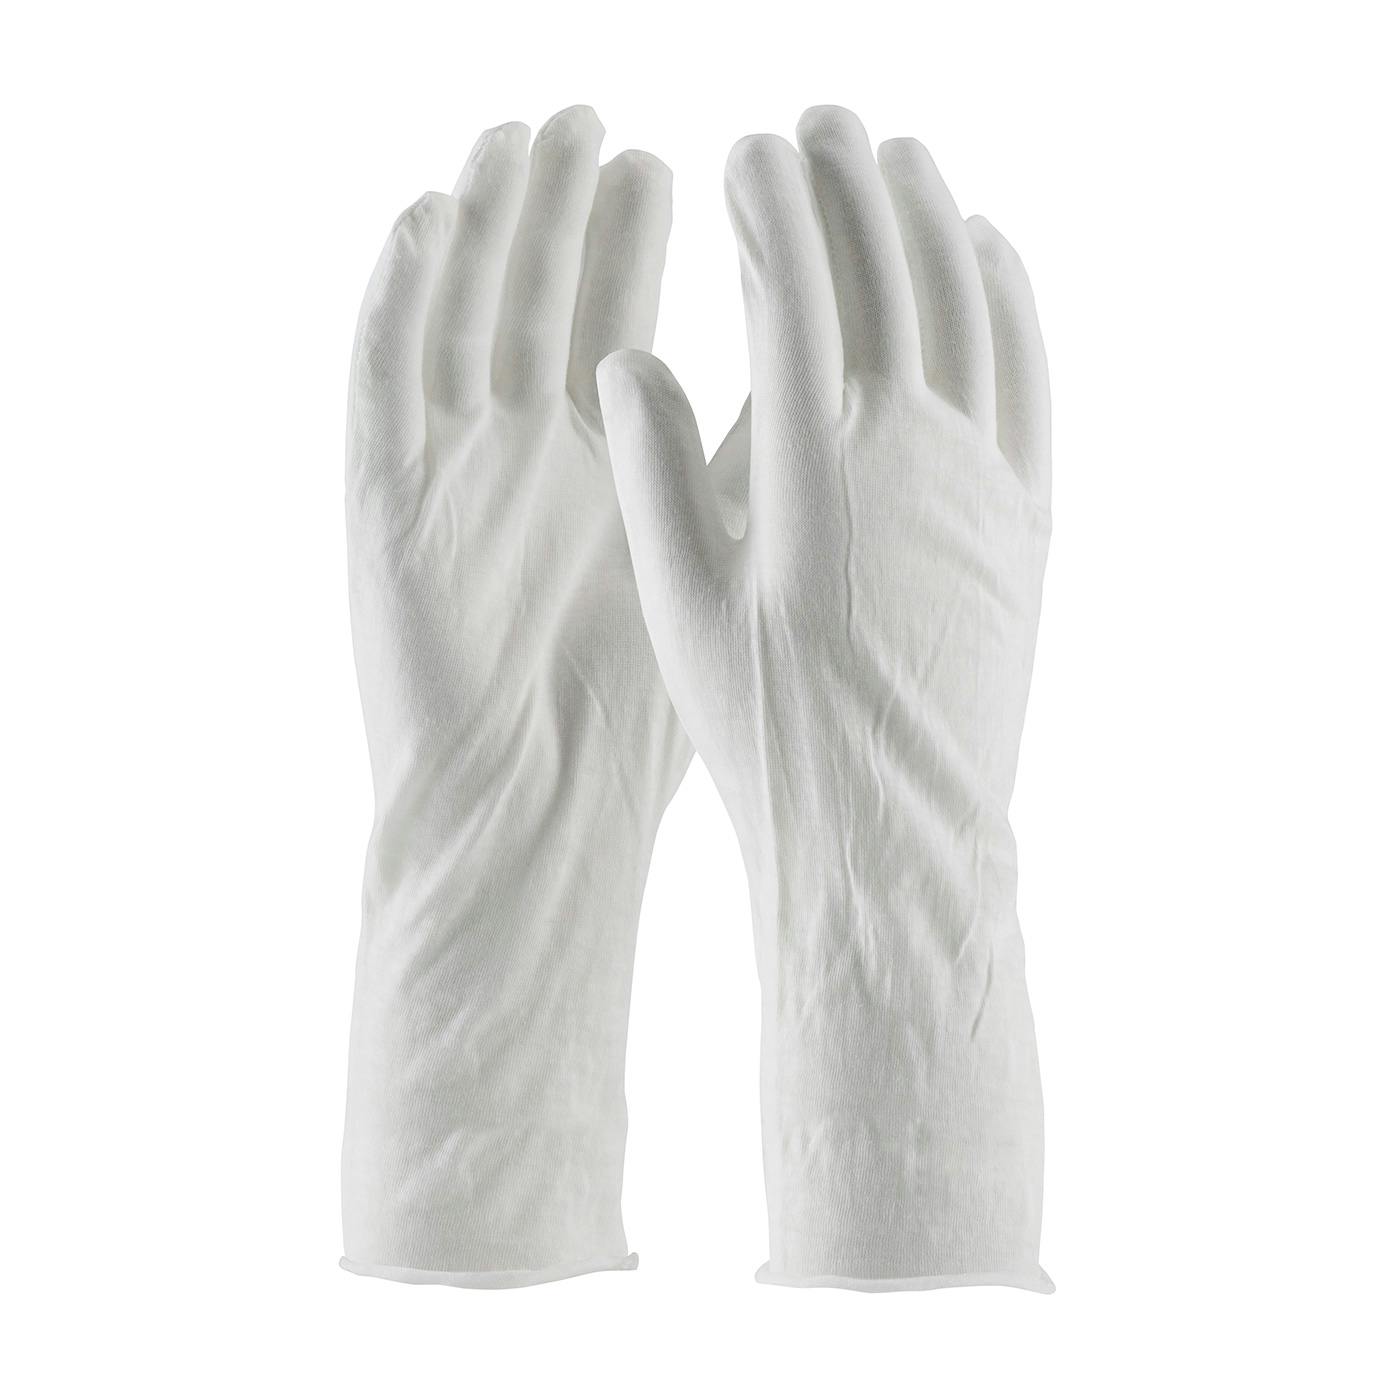 Medium Weight Cotton Lisle Inspection Glove with Unhemmed Cuff - 14", White (97-520/14) - MENS